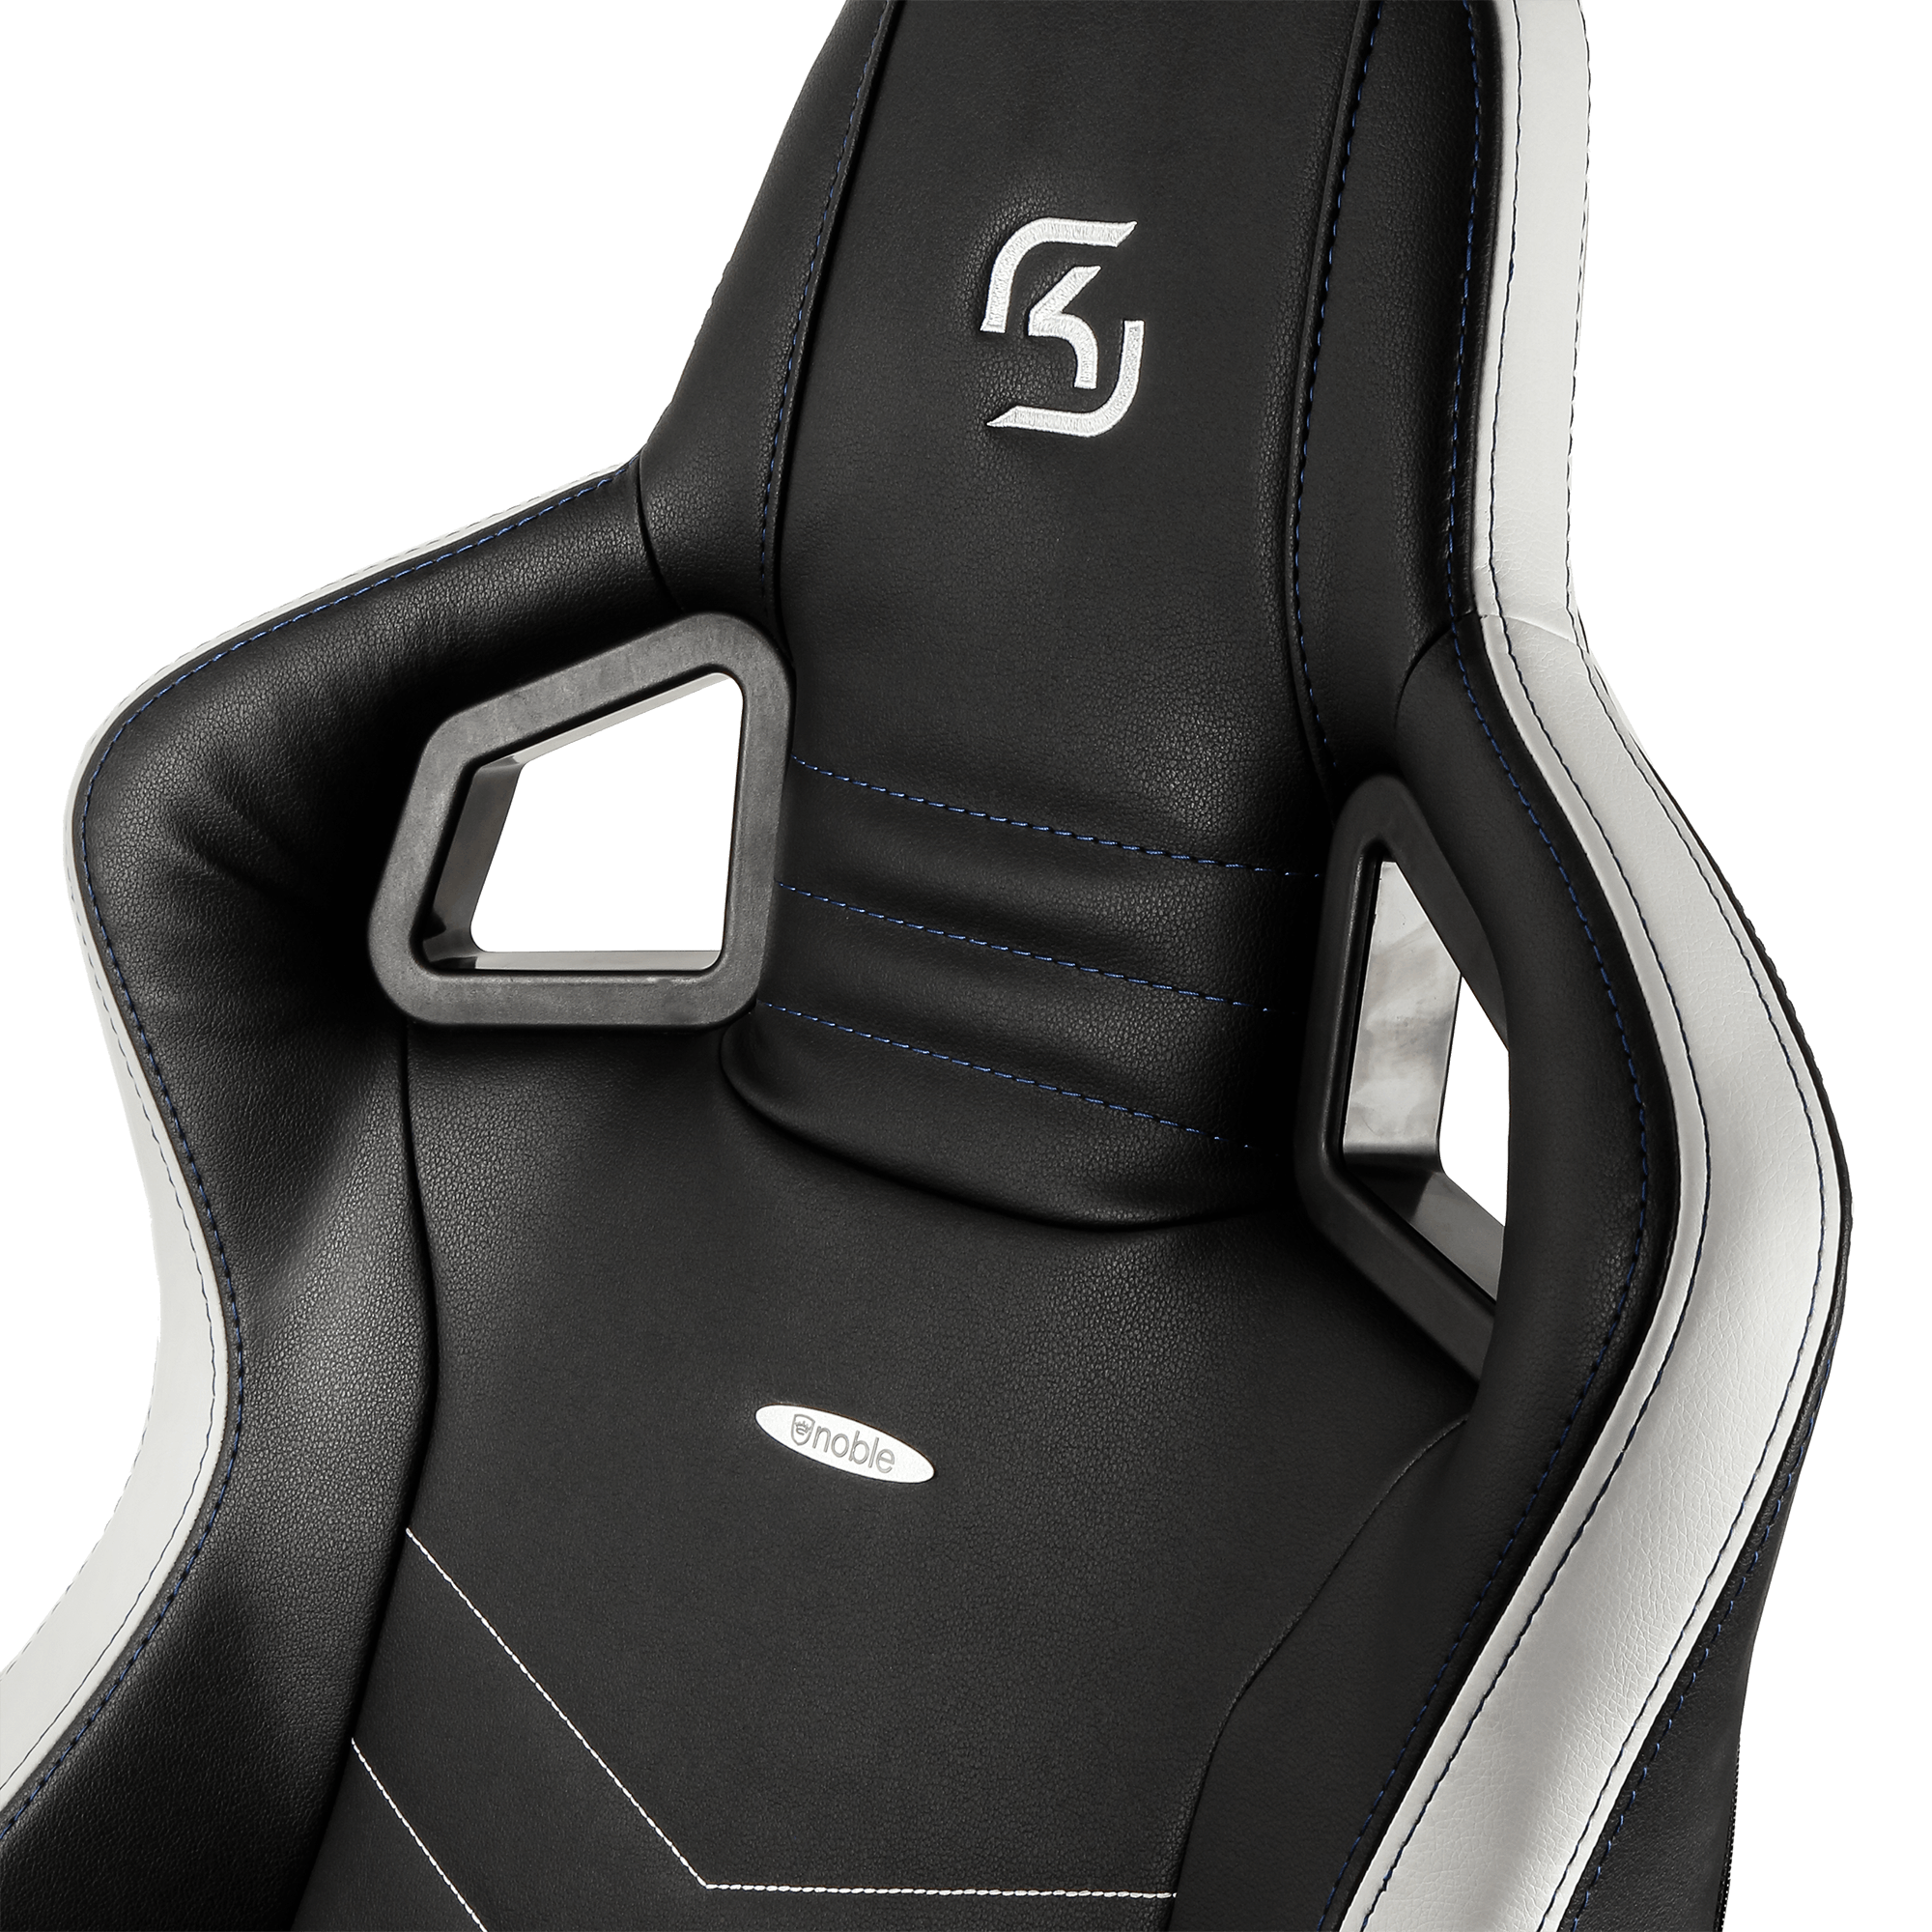 Noblechairs - EPIC SK Gaming Edition